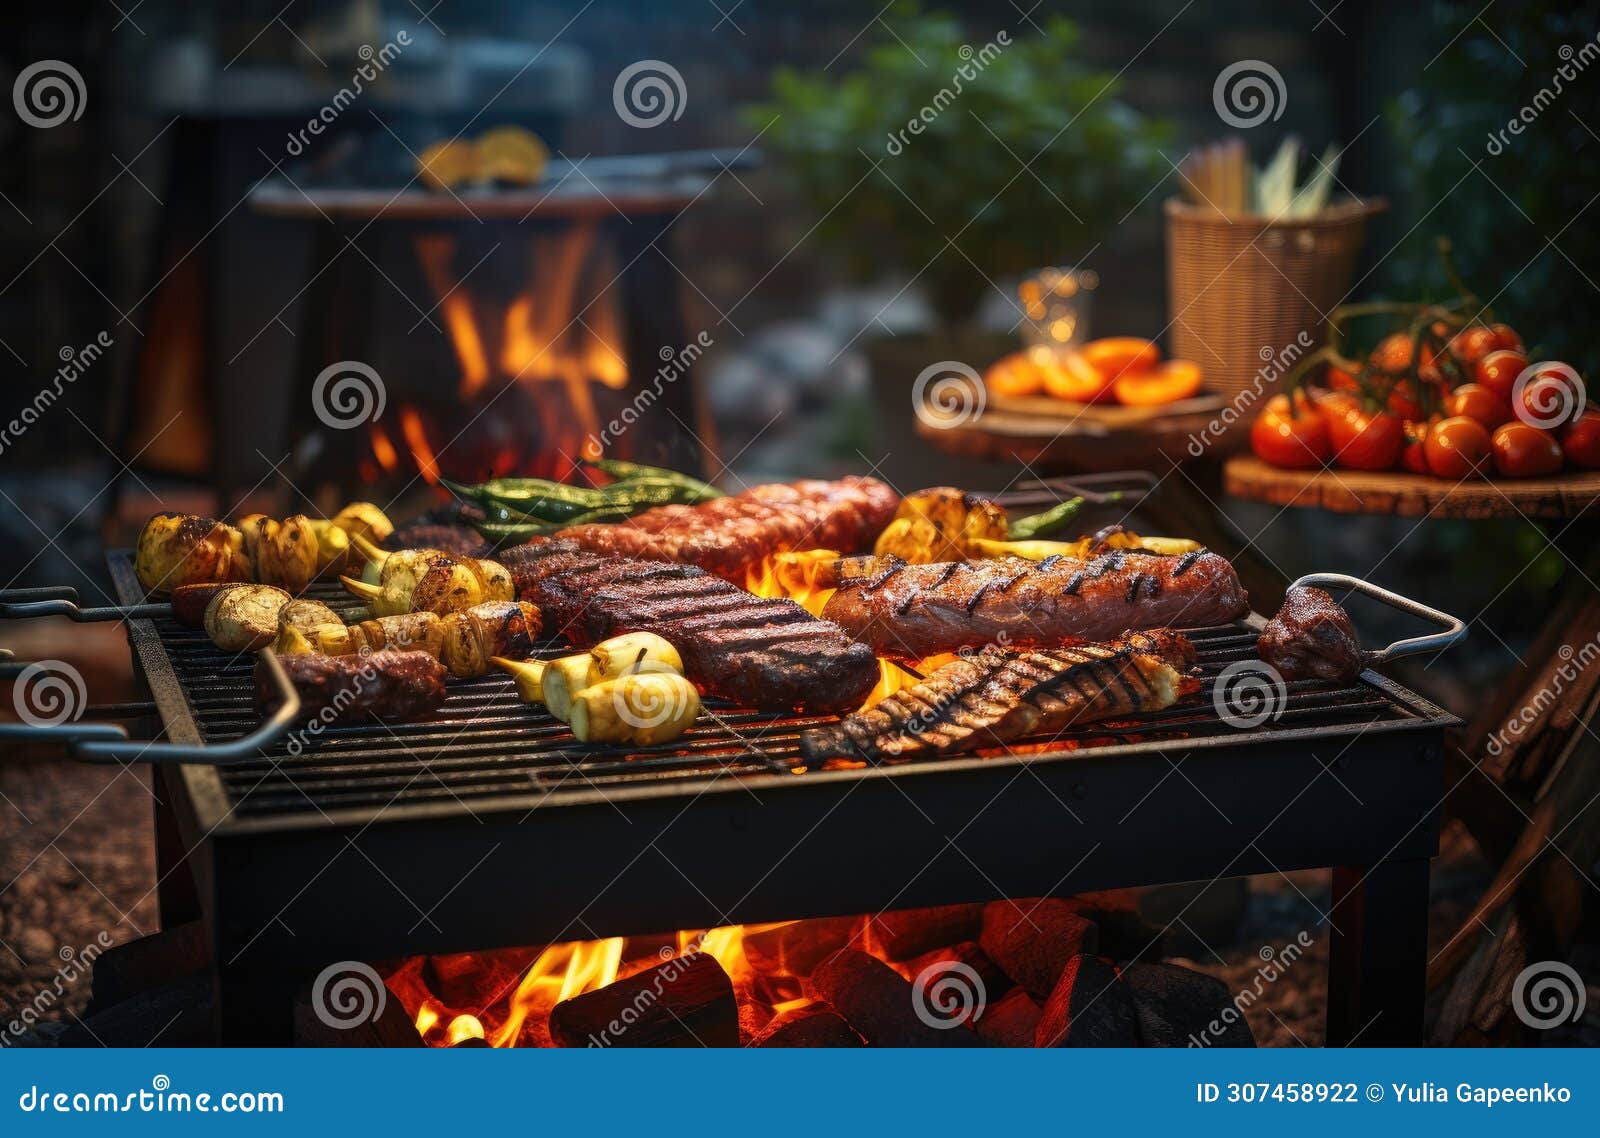 best barbecue for savoury meals without the hassle and crowds